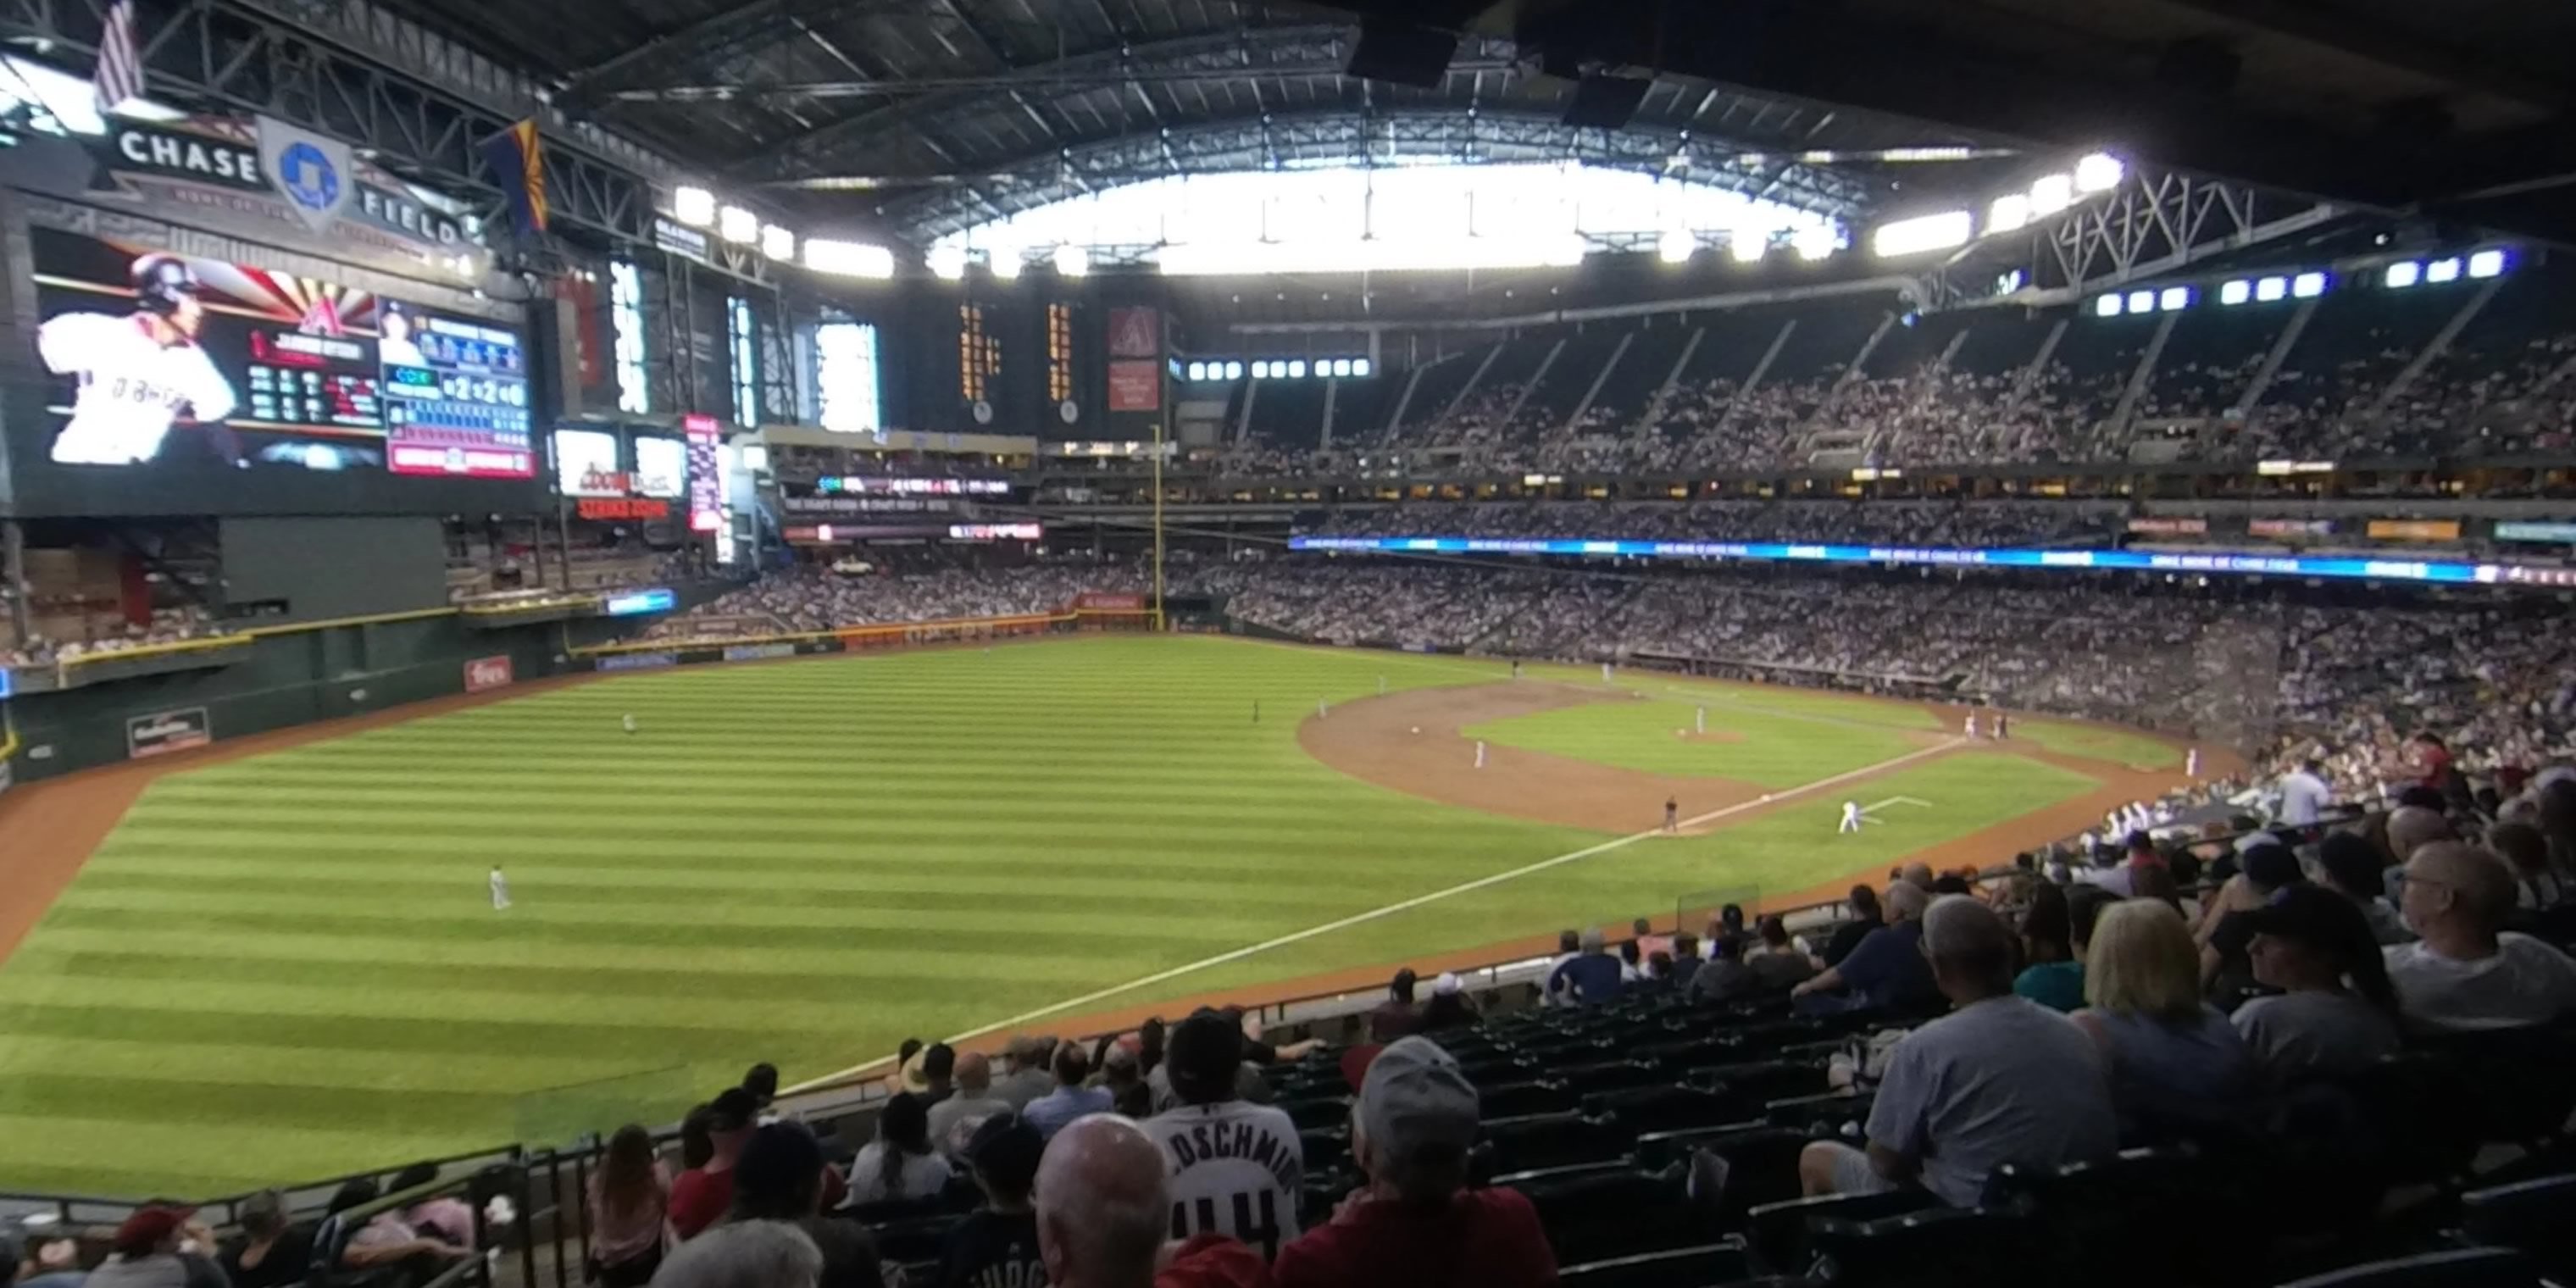 section 218 panoramic seat view  for baseball - chase field